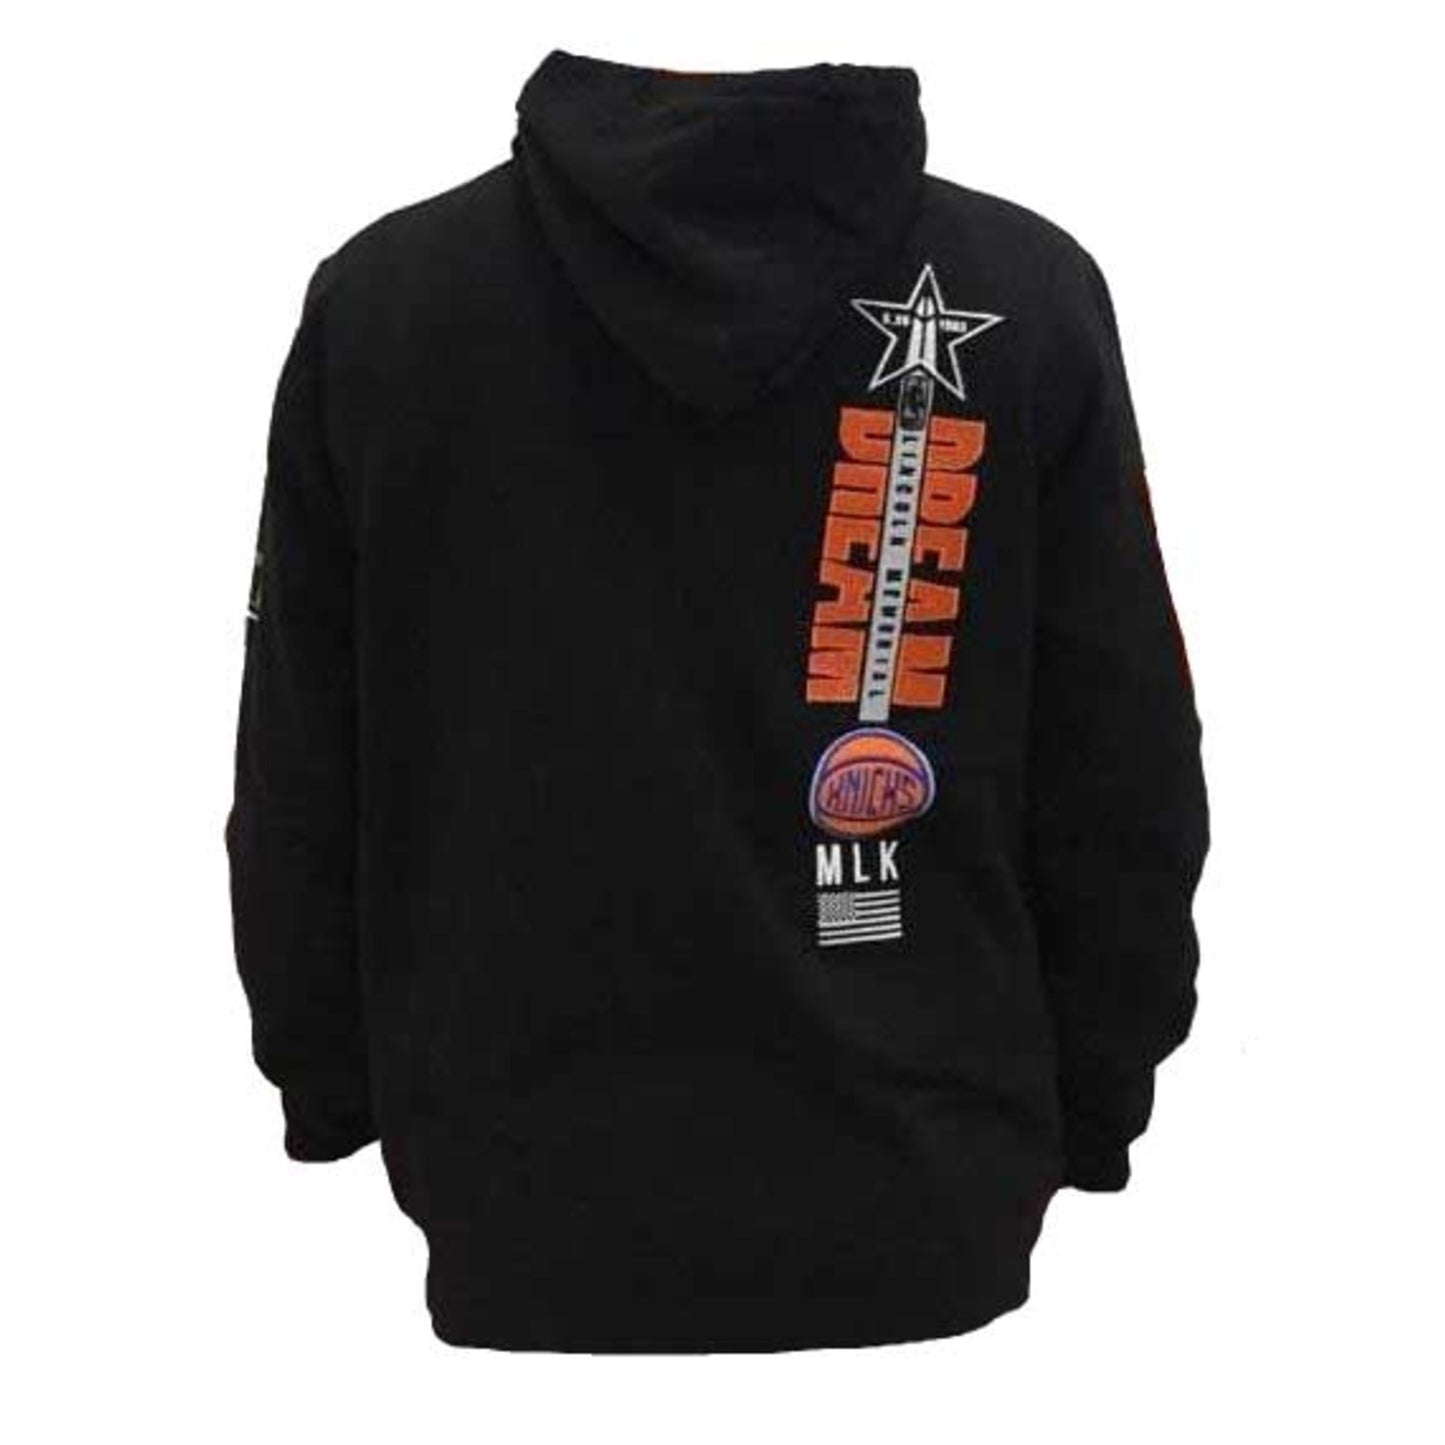 FISLL Knicks Black History Collection Hoodie - Back View